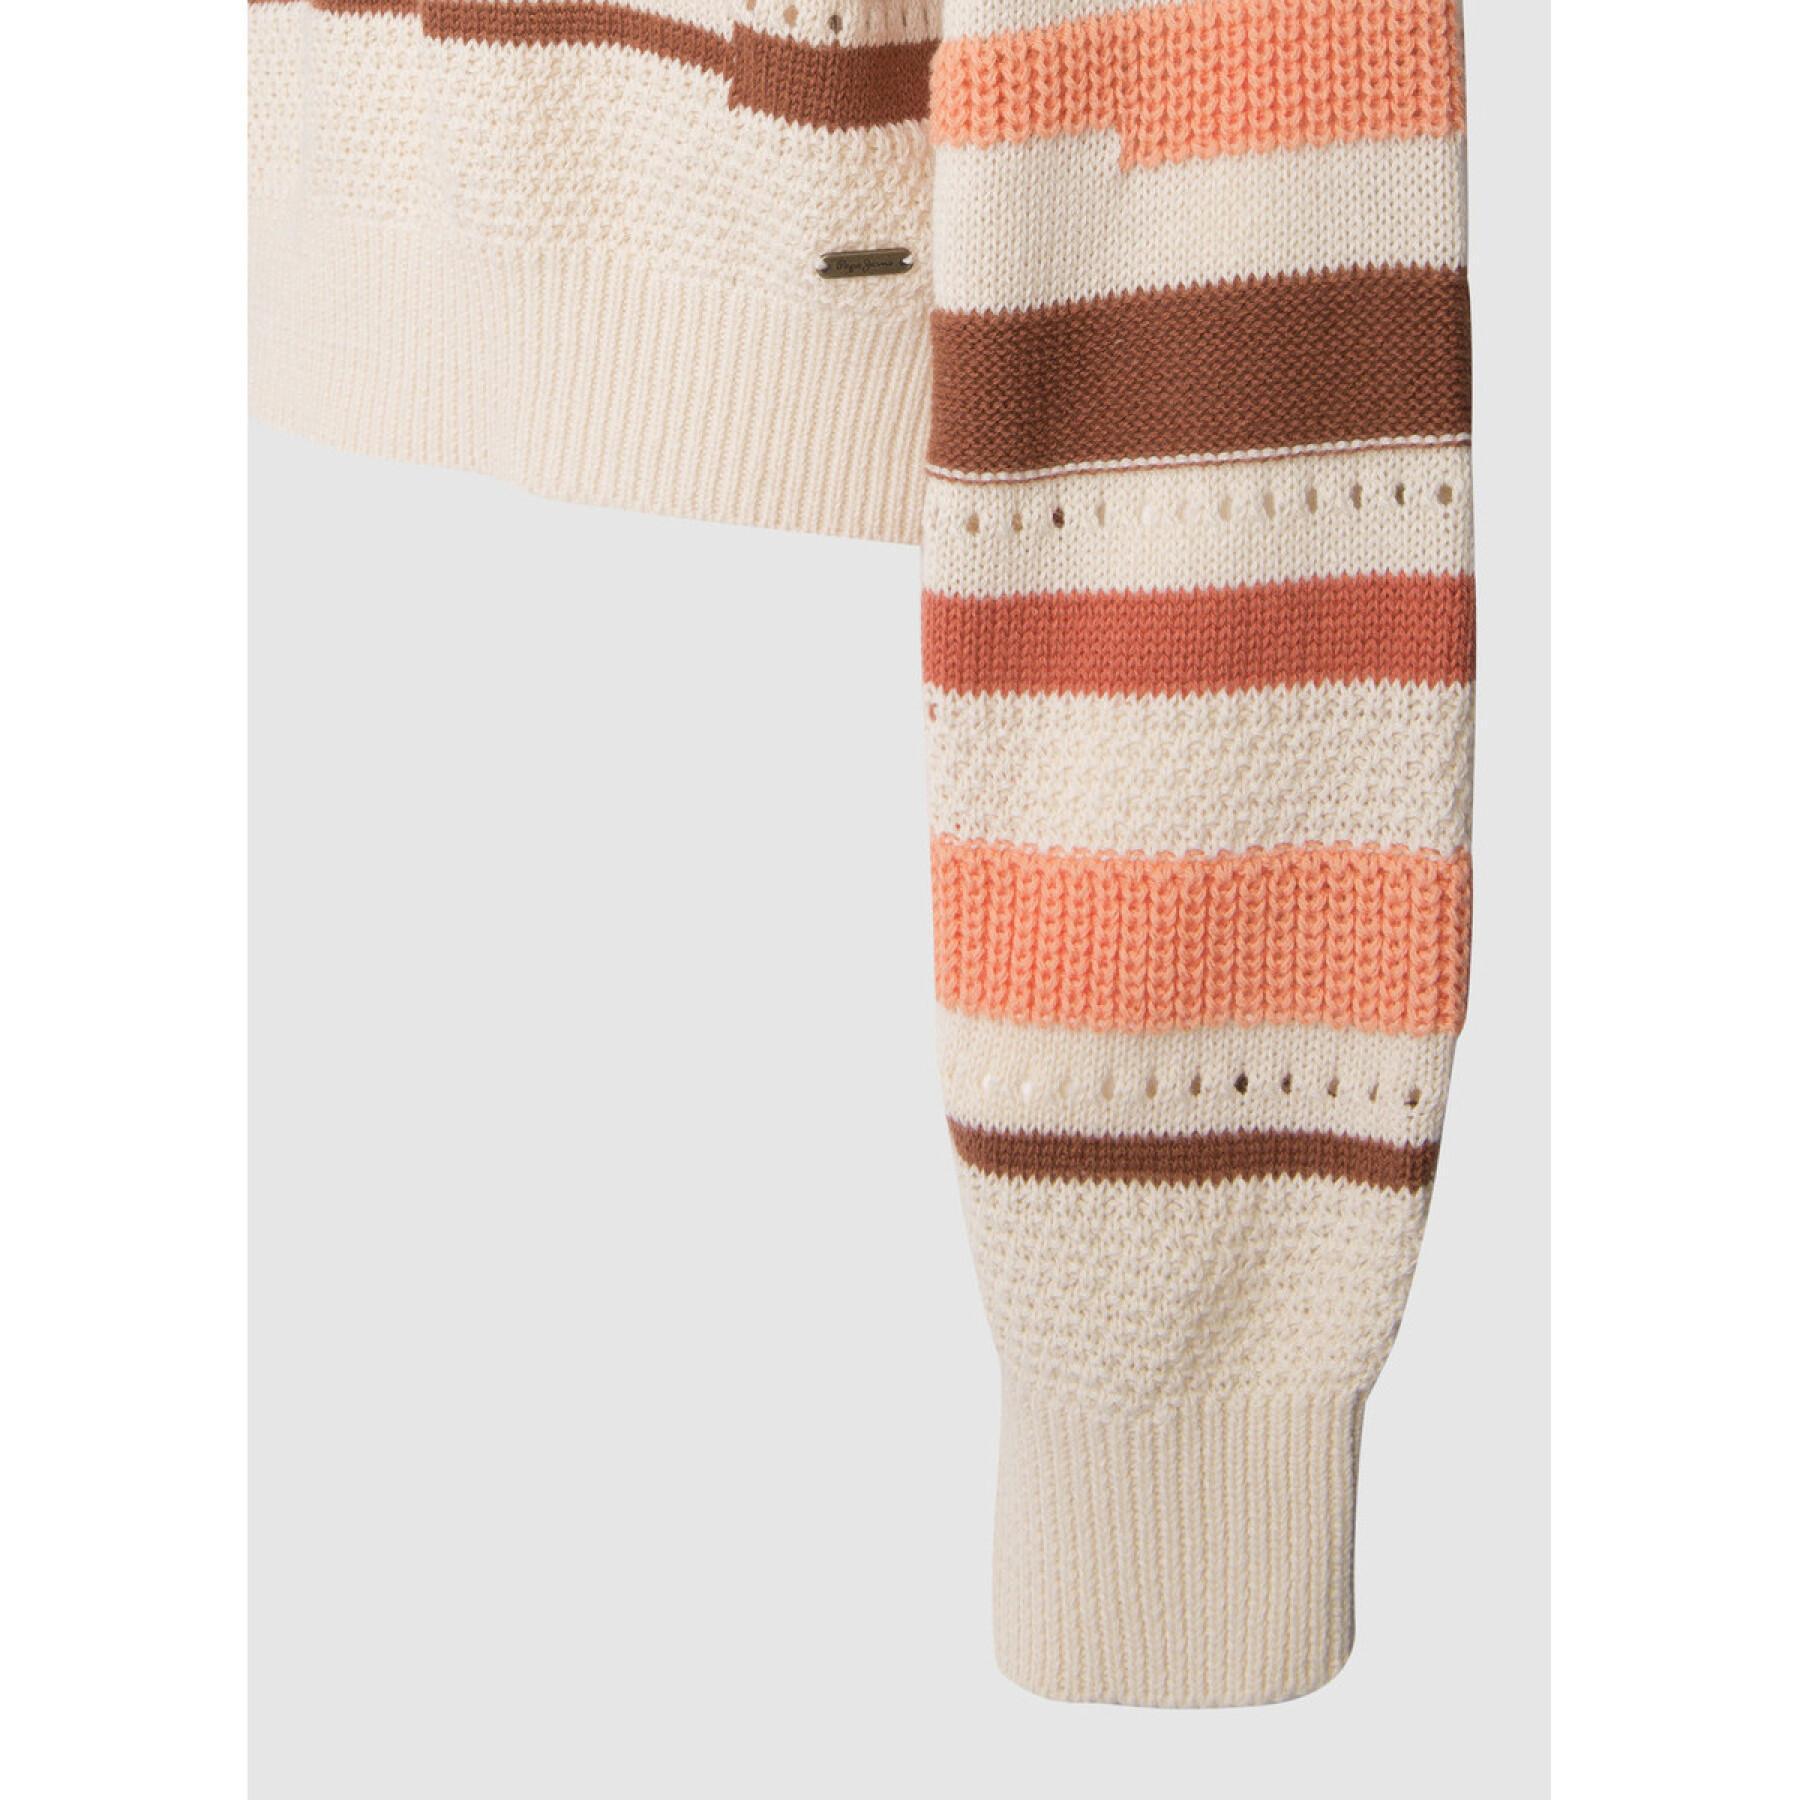 Woman sweater Pepe Jeans Frances